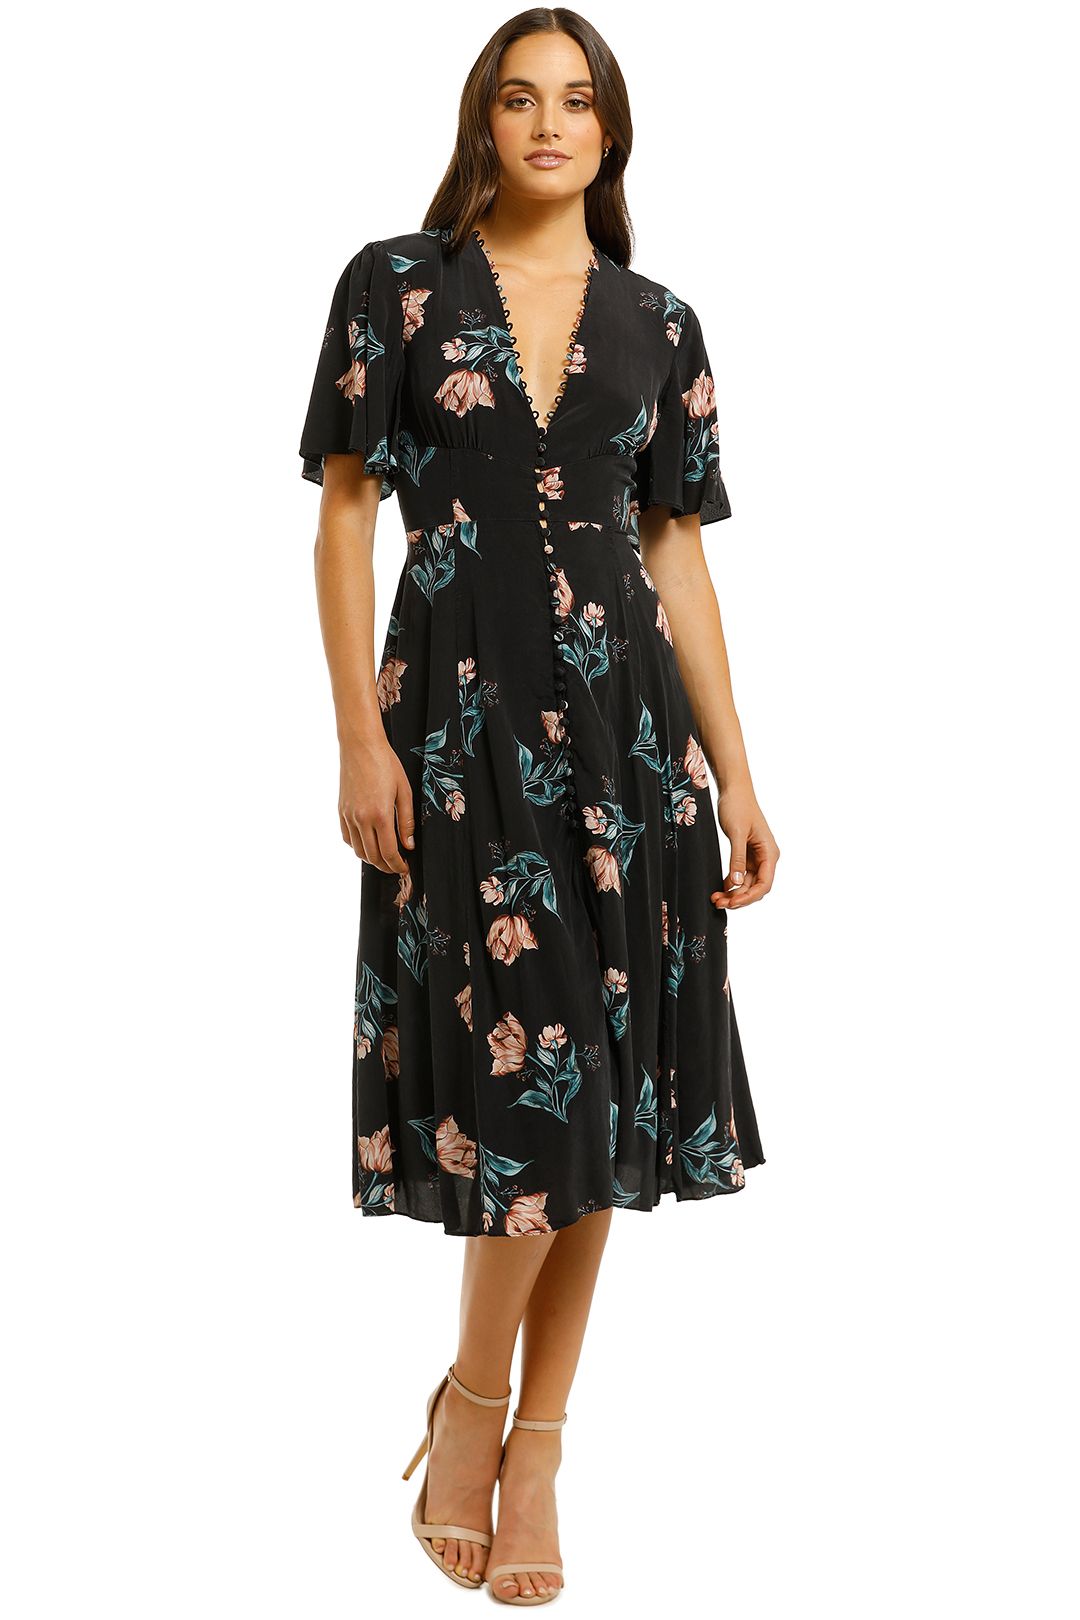 Piper Floral Button Midi Dress by Nicholas for Rent